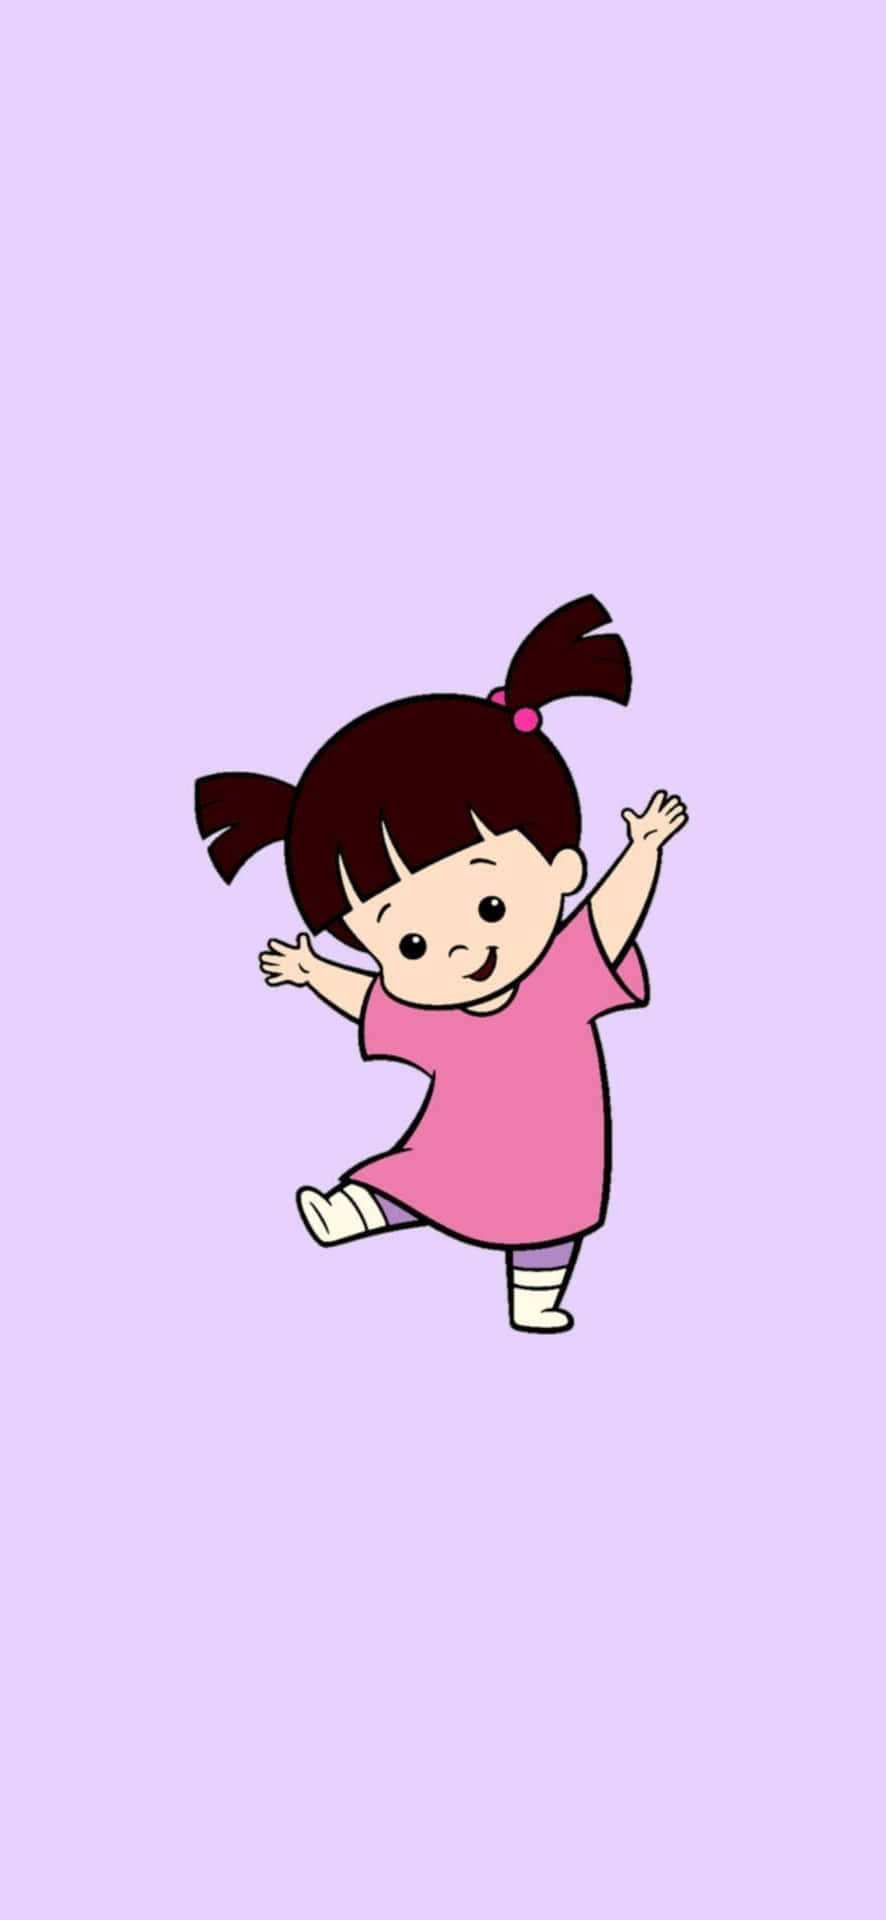 A Cartoon Girl With Her Arms Up In The Air Wallpaper